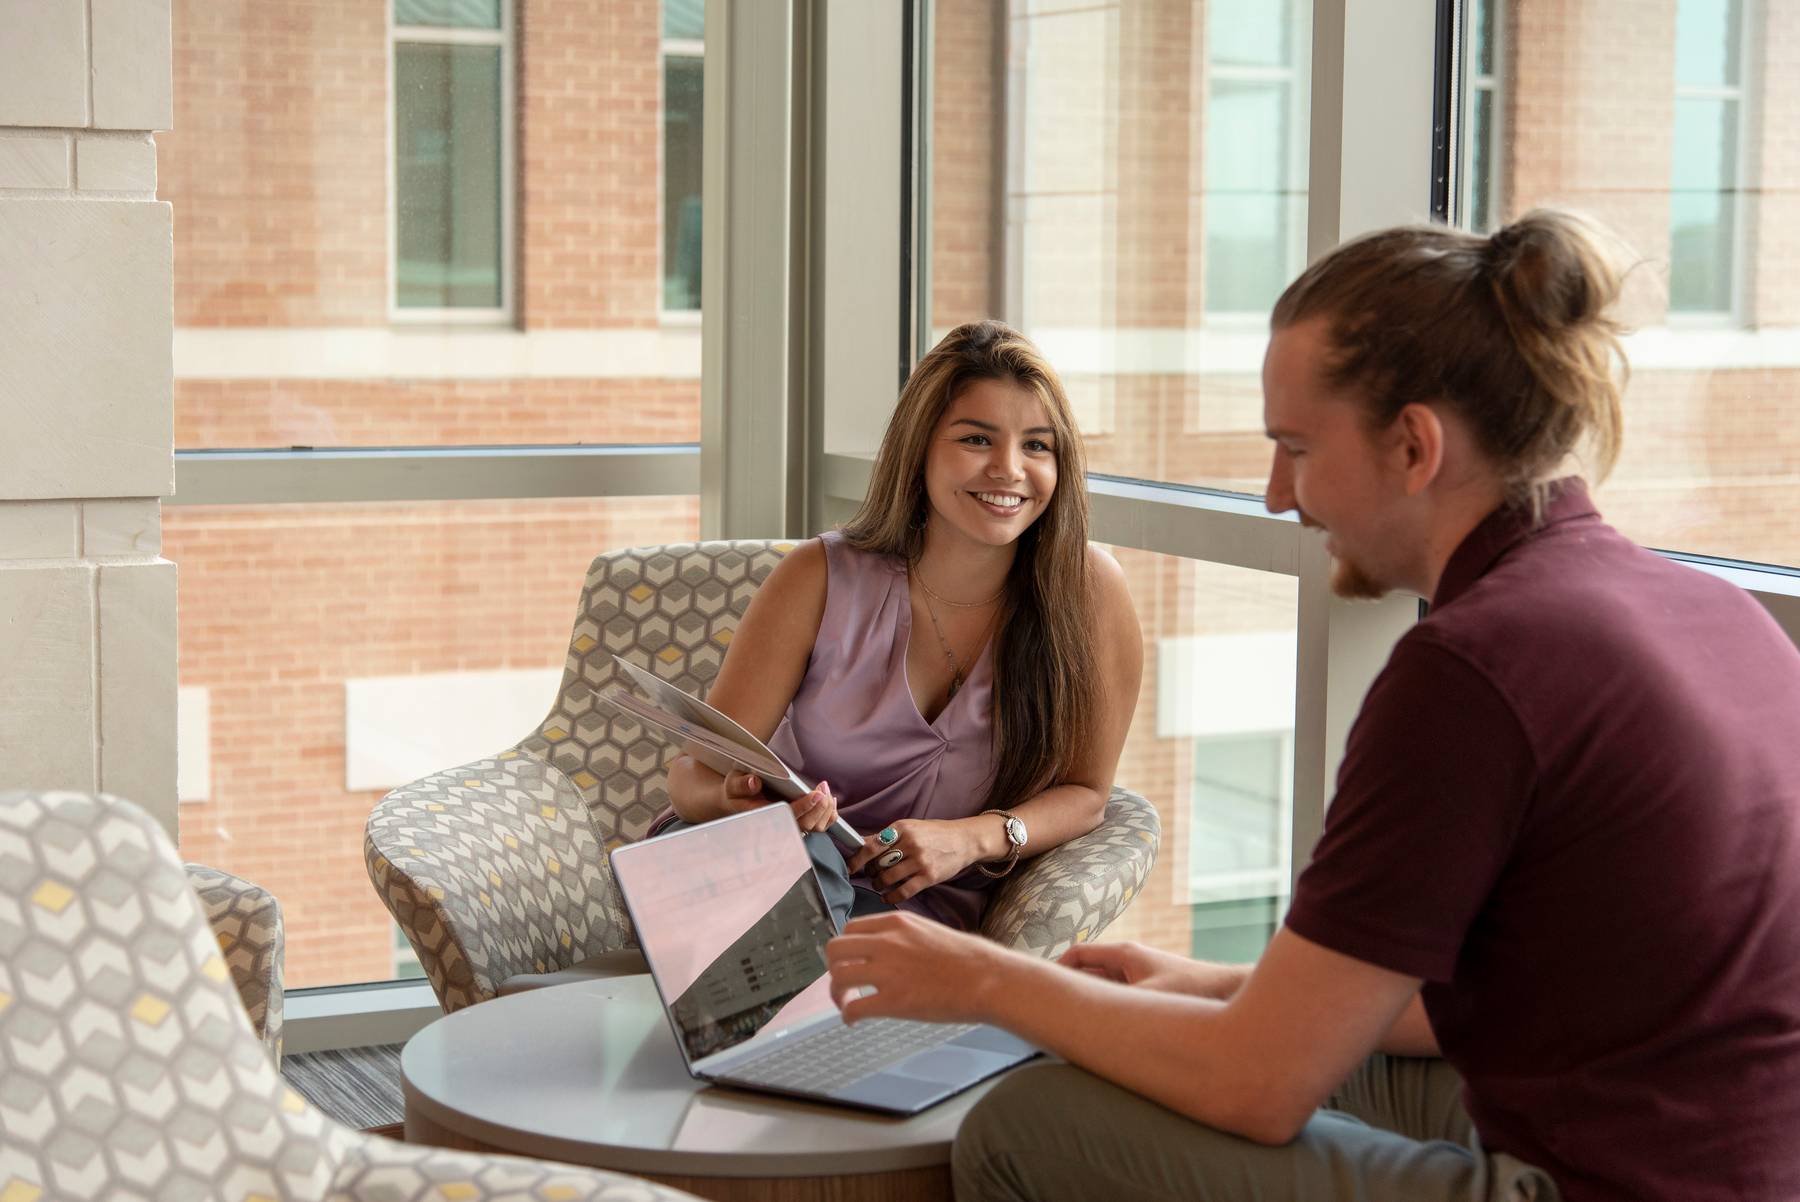 Students Studying in the LBJ Student Center